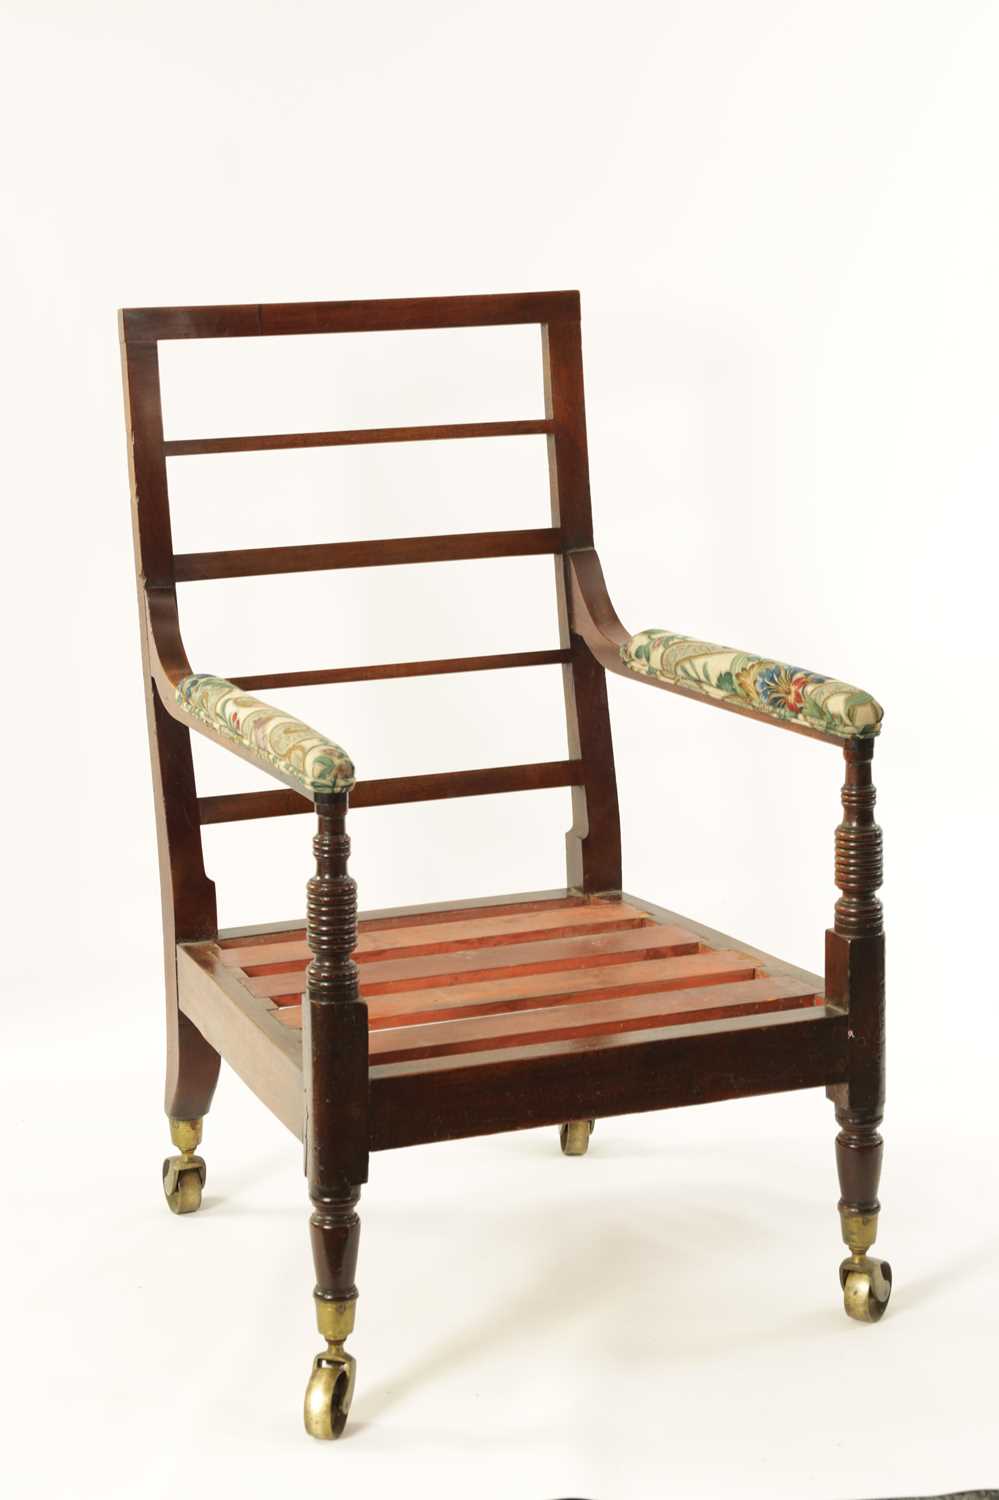 A GEORGE III MAHOGANY LIBRARY CHAIR - Image 9 of 11